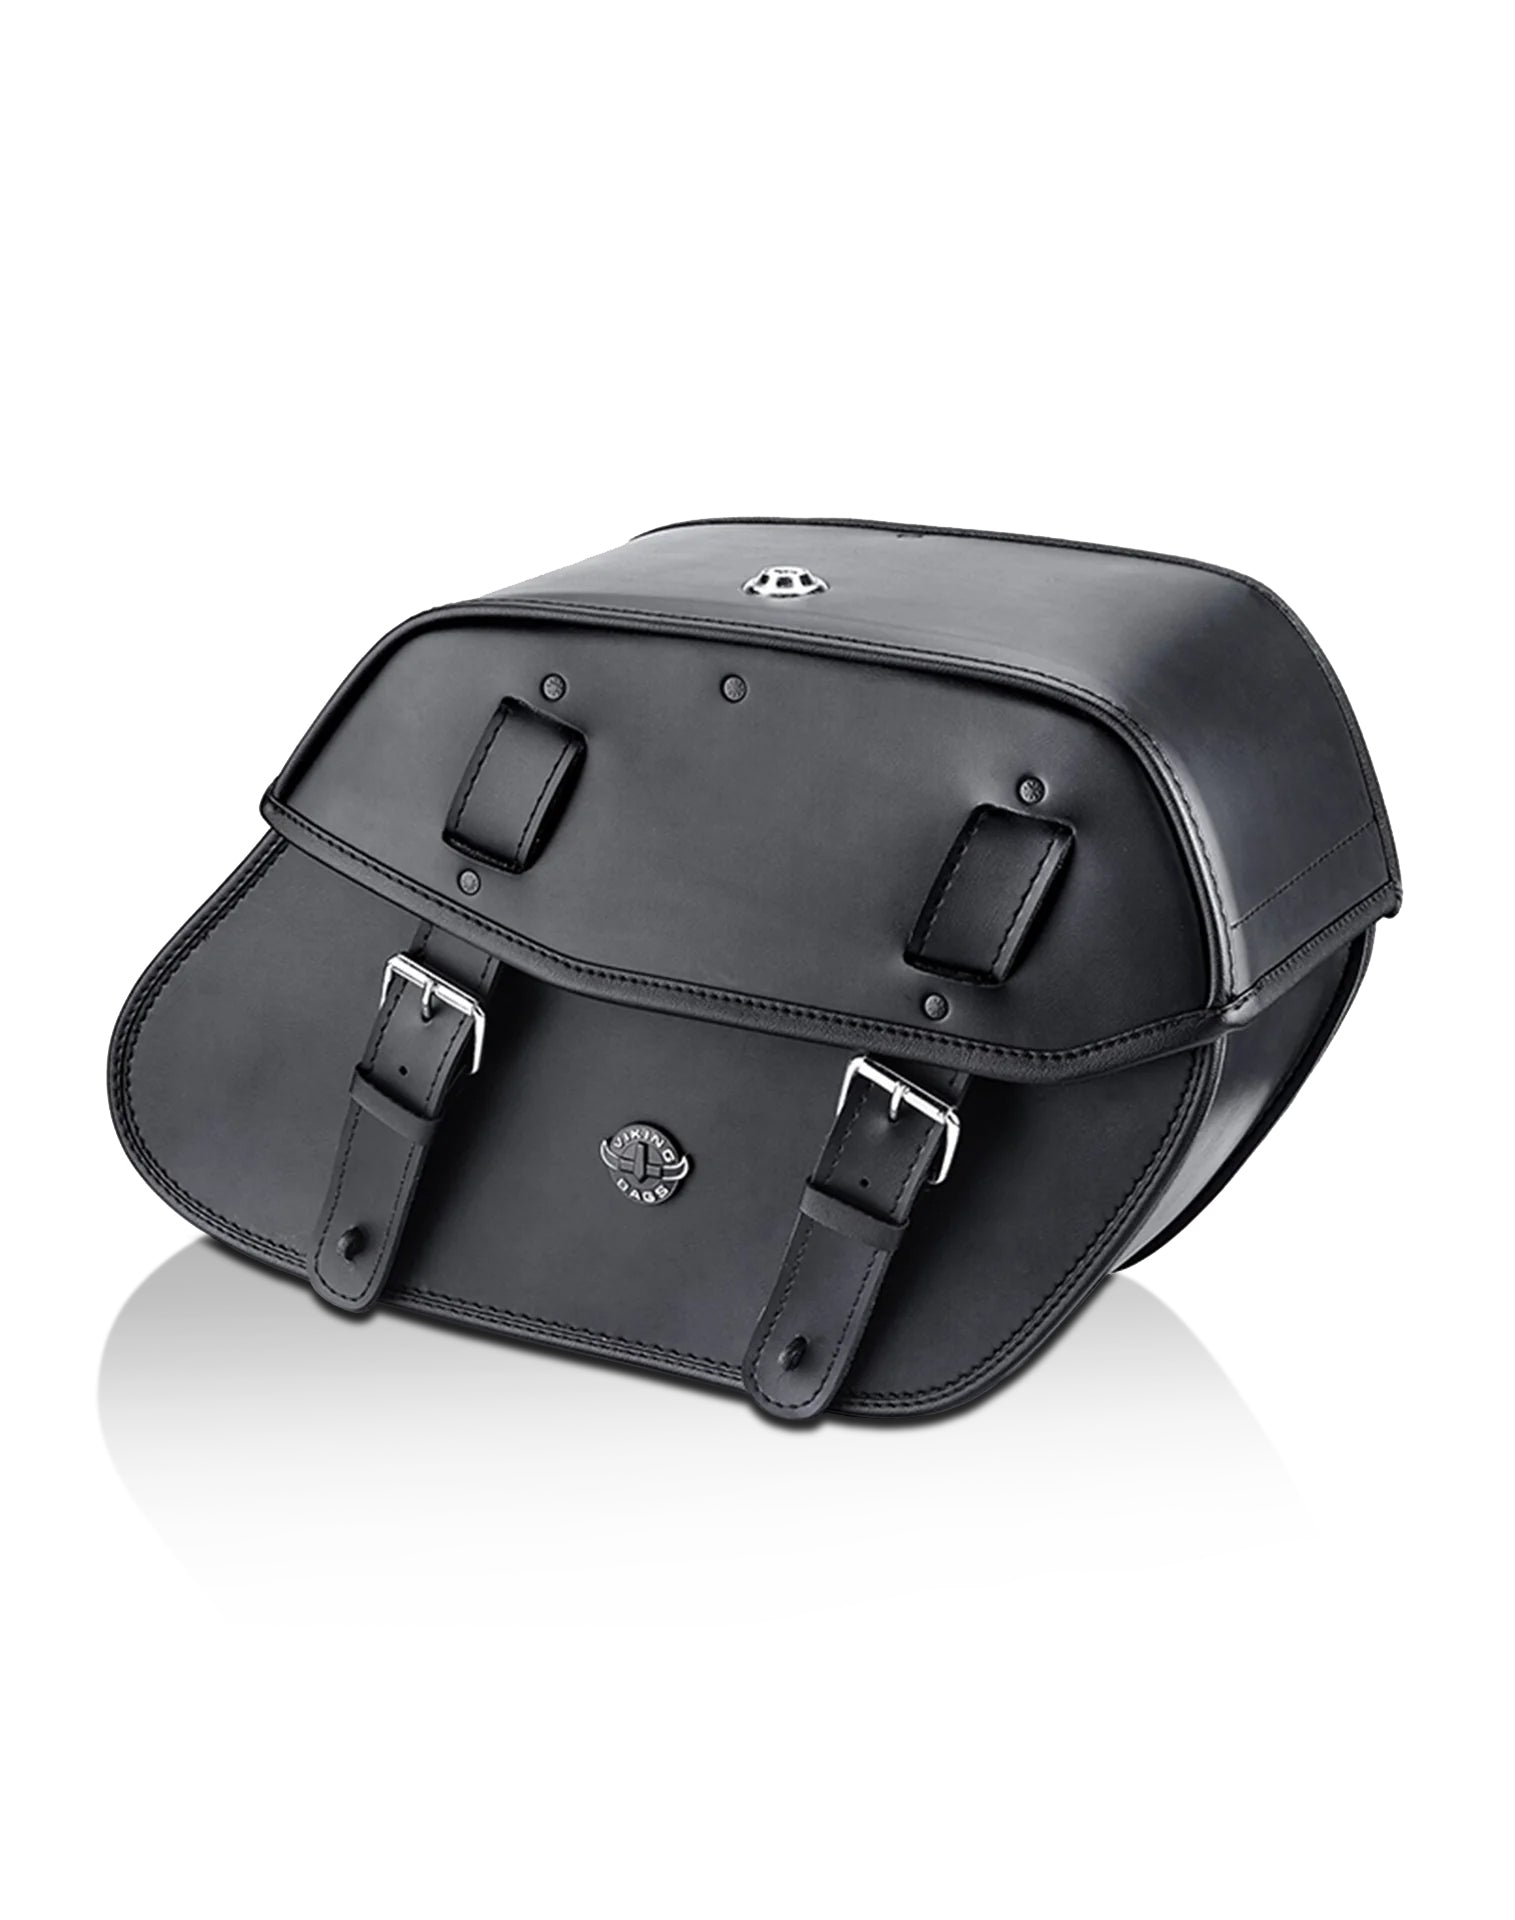 Viking Odin Large Leather Motorcycle Saddlebags For Harley Softail Breakout 114 Fxbr S Main View